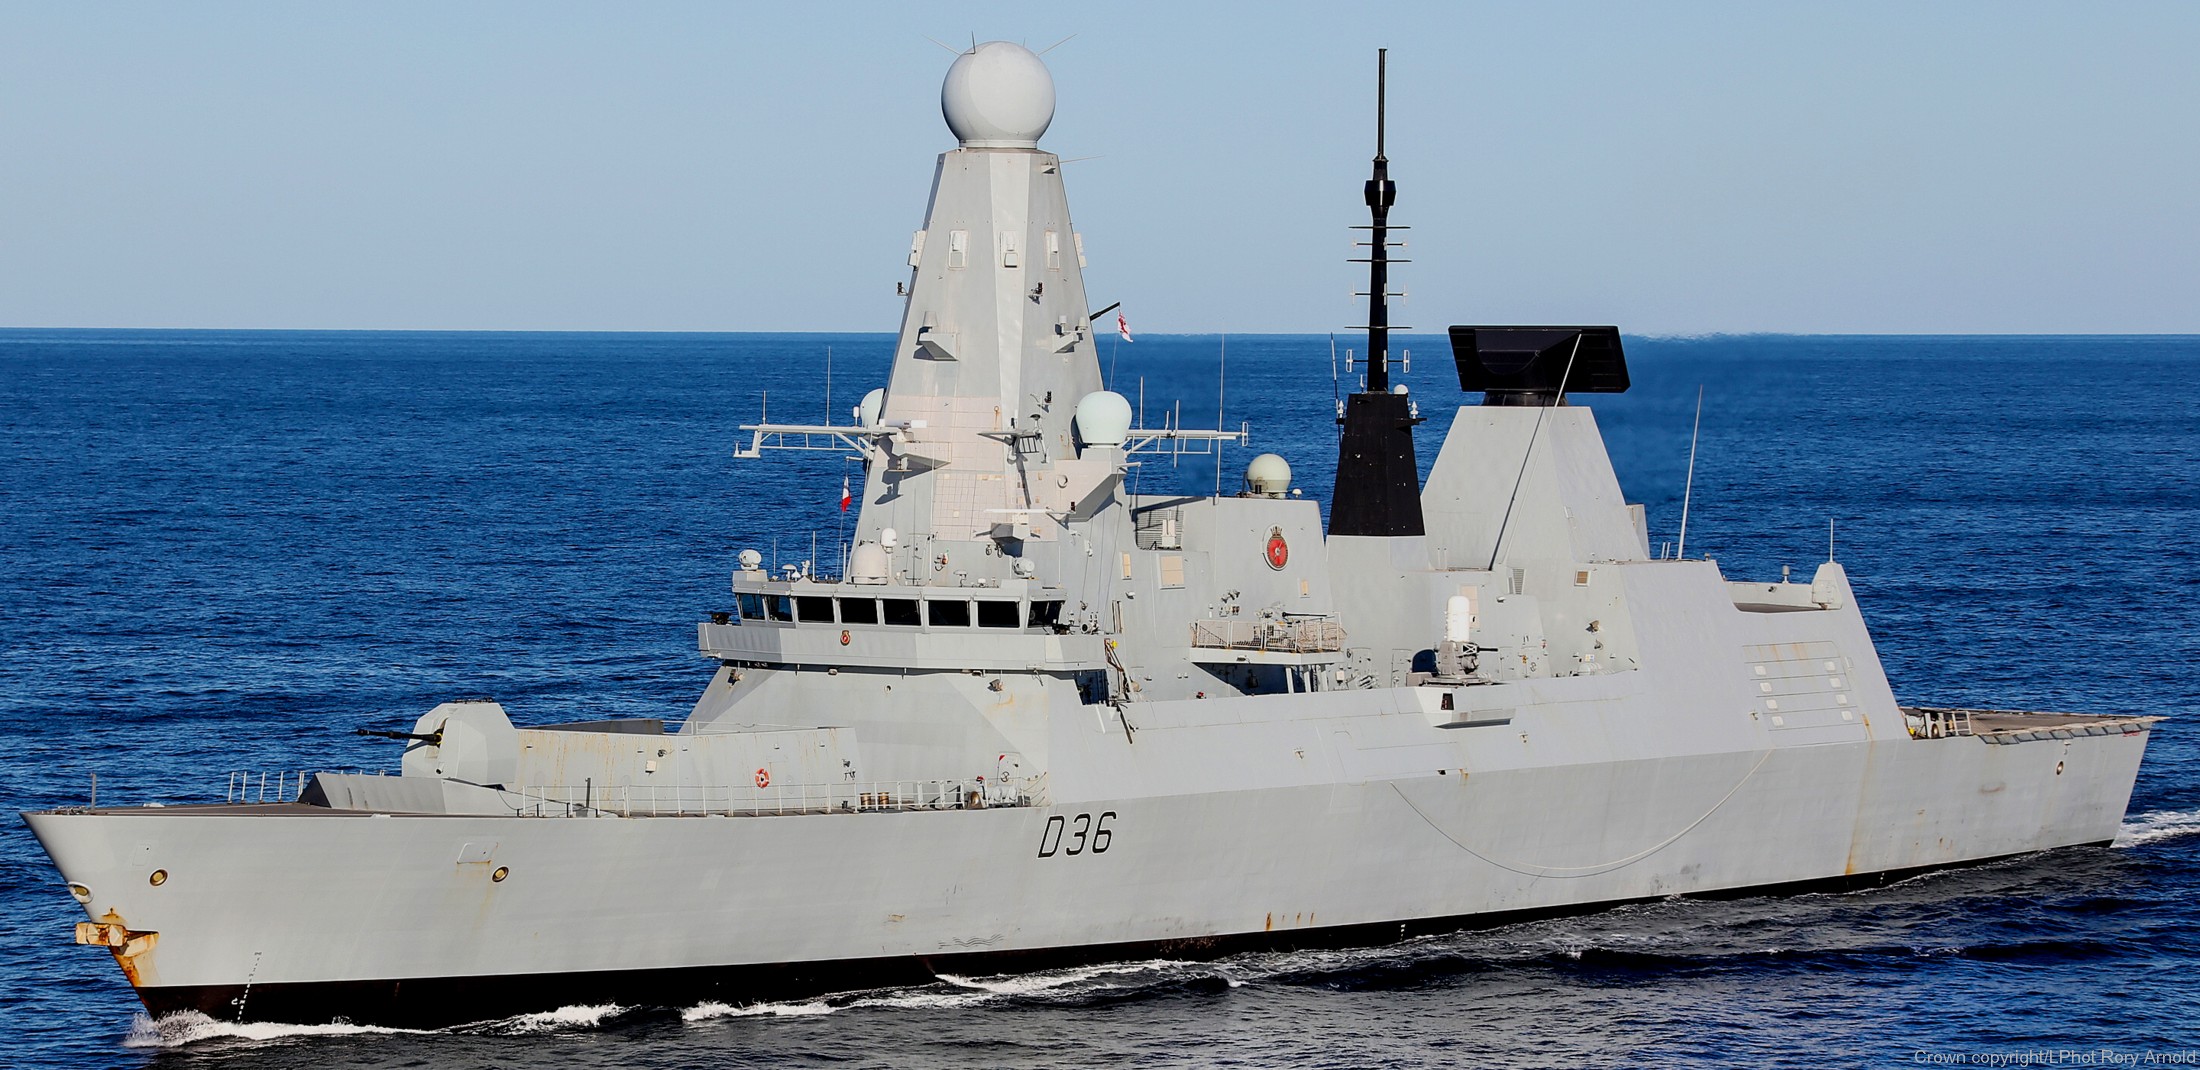 d36 hms defender d-36 type 45 daring class guided missile destroyer ddg royal navy sea viper 35